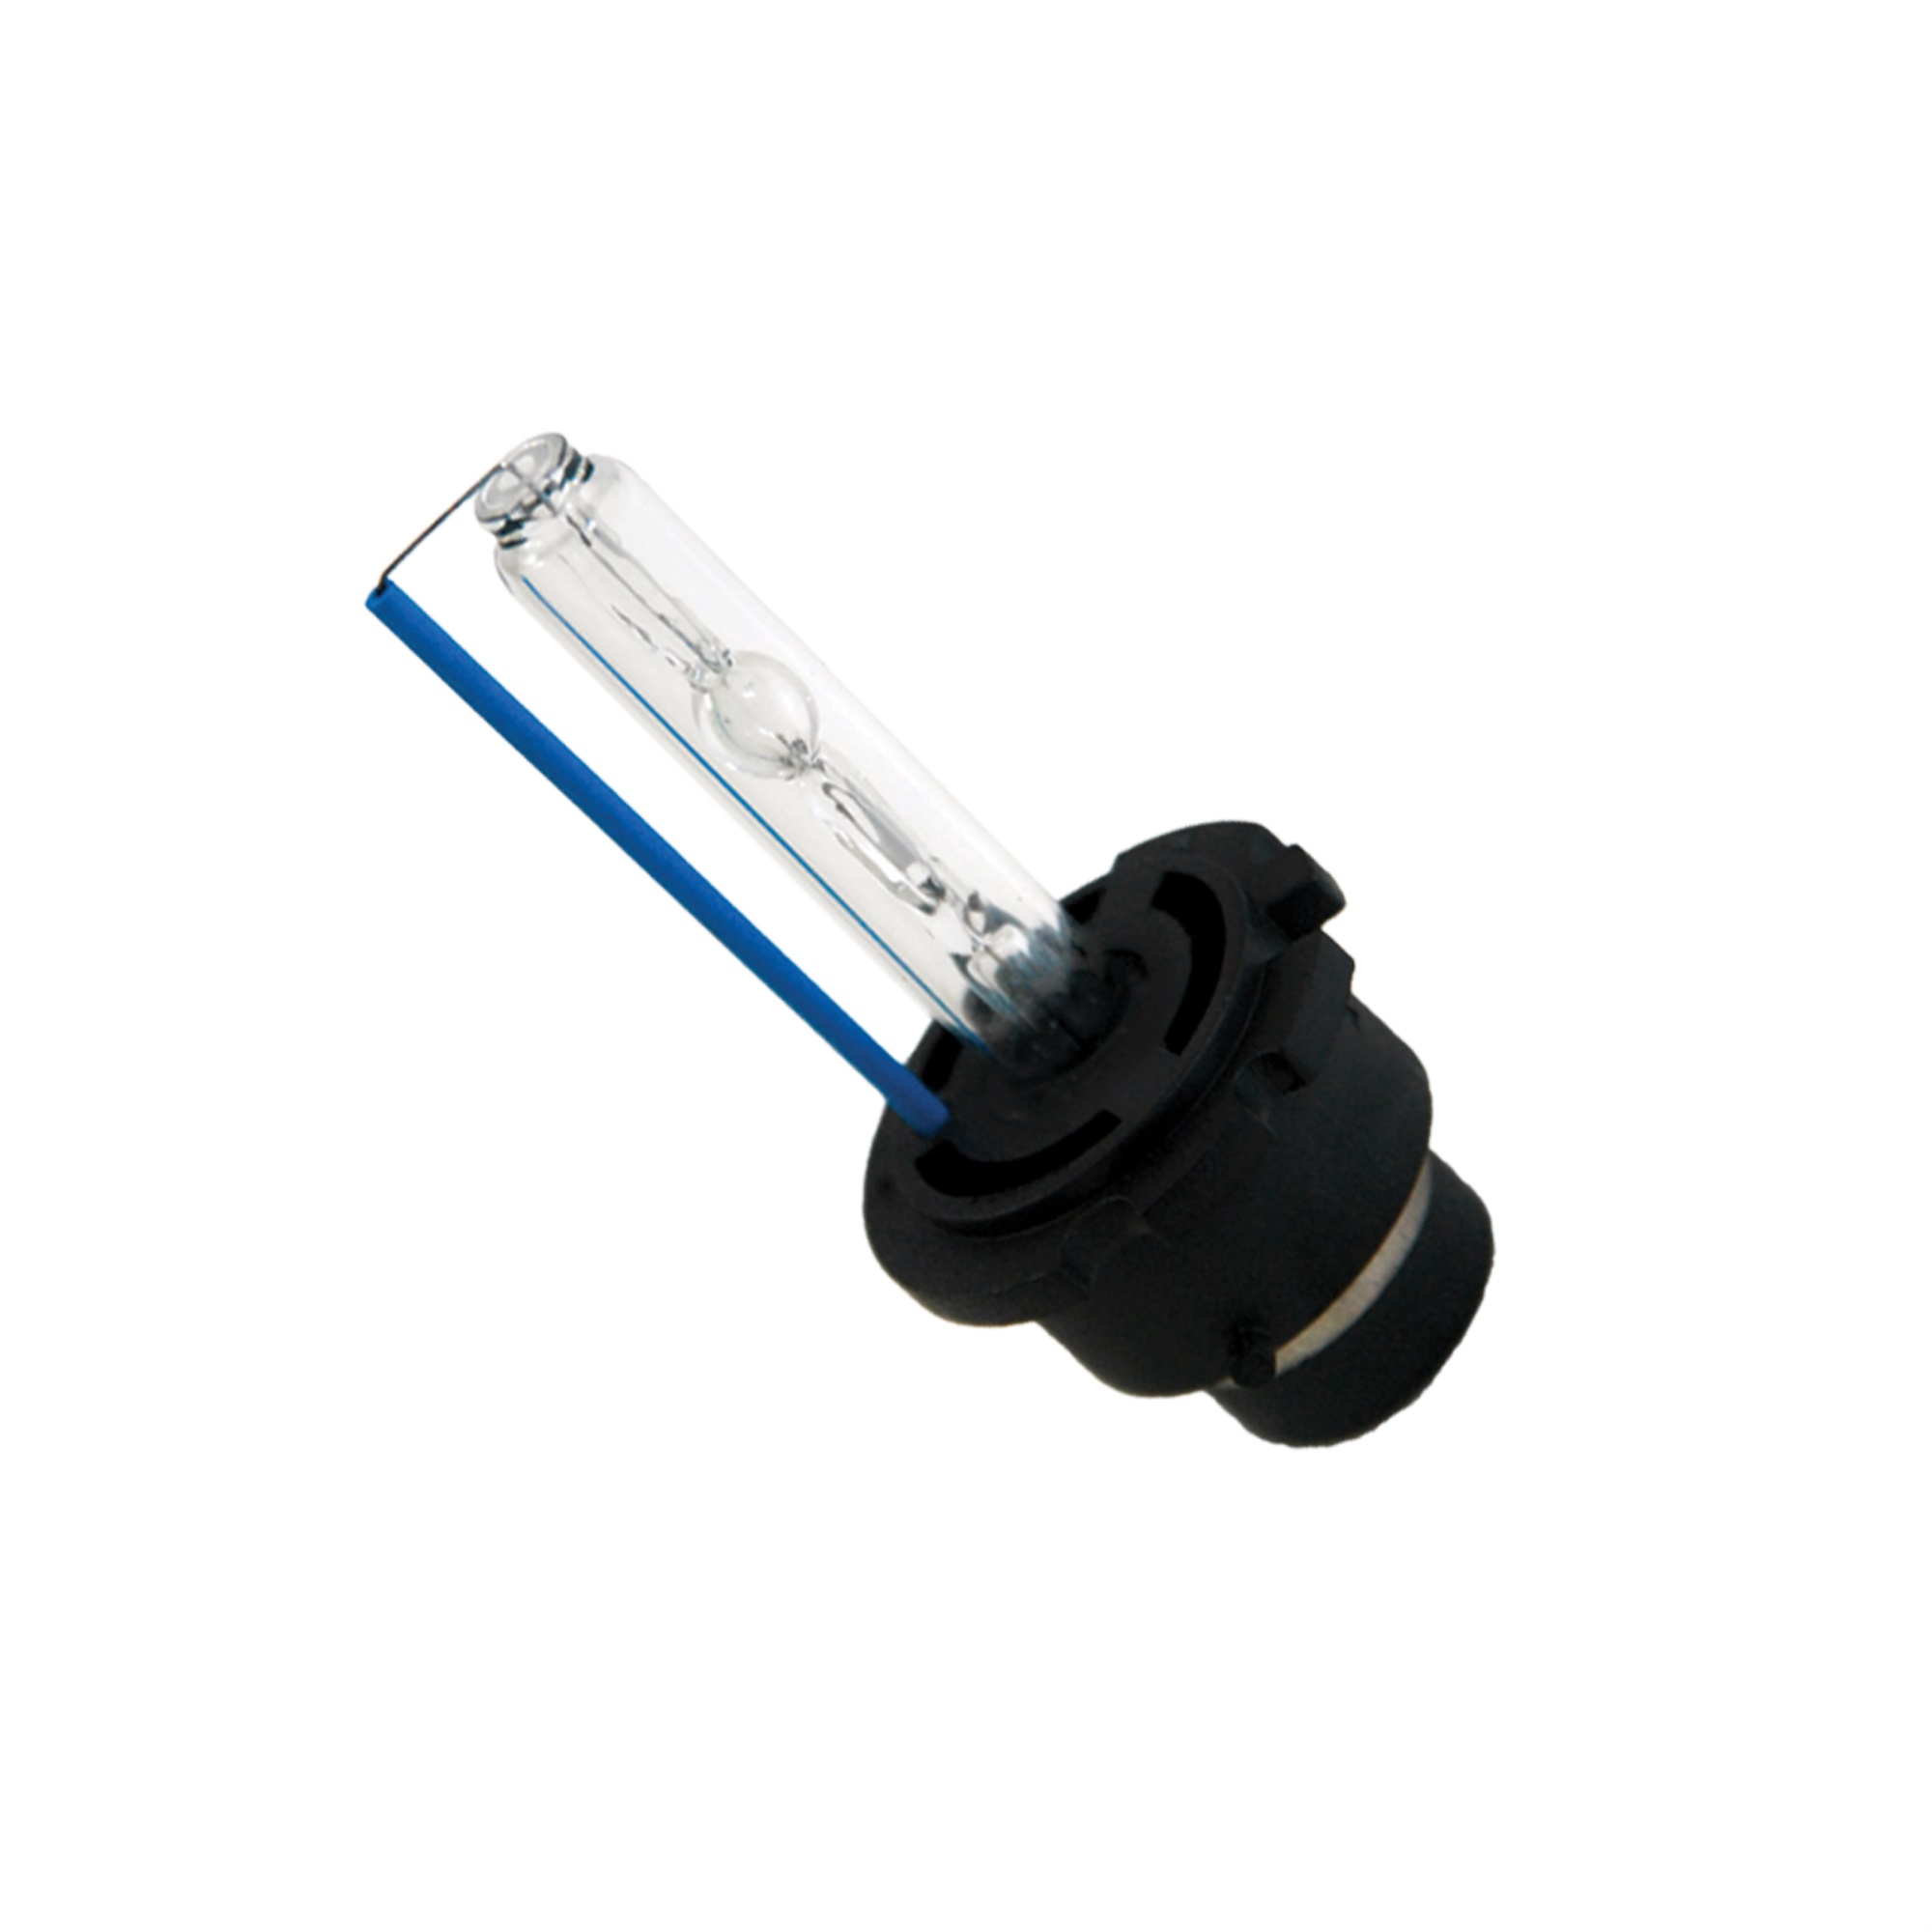 ORACLE Lighting D2S Factory Replacement Xenon Bulb - 8000K